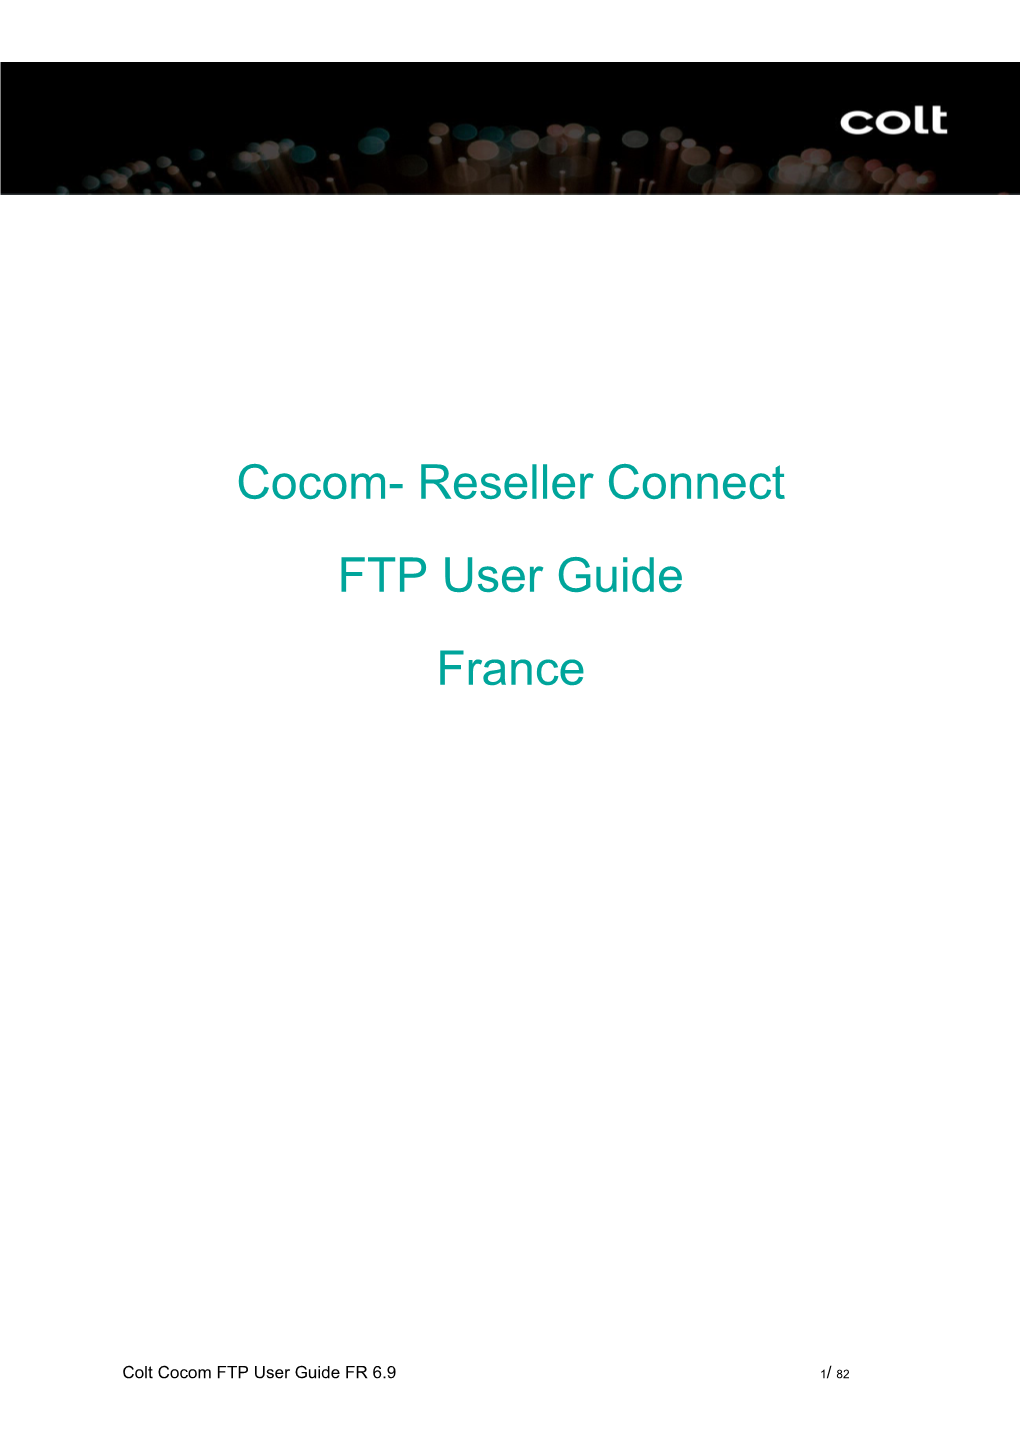 Cocom- Reseller Connect